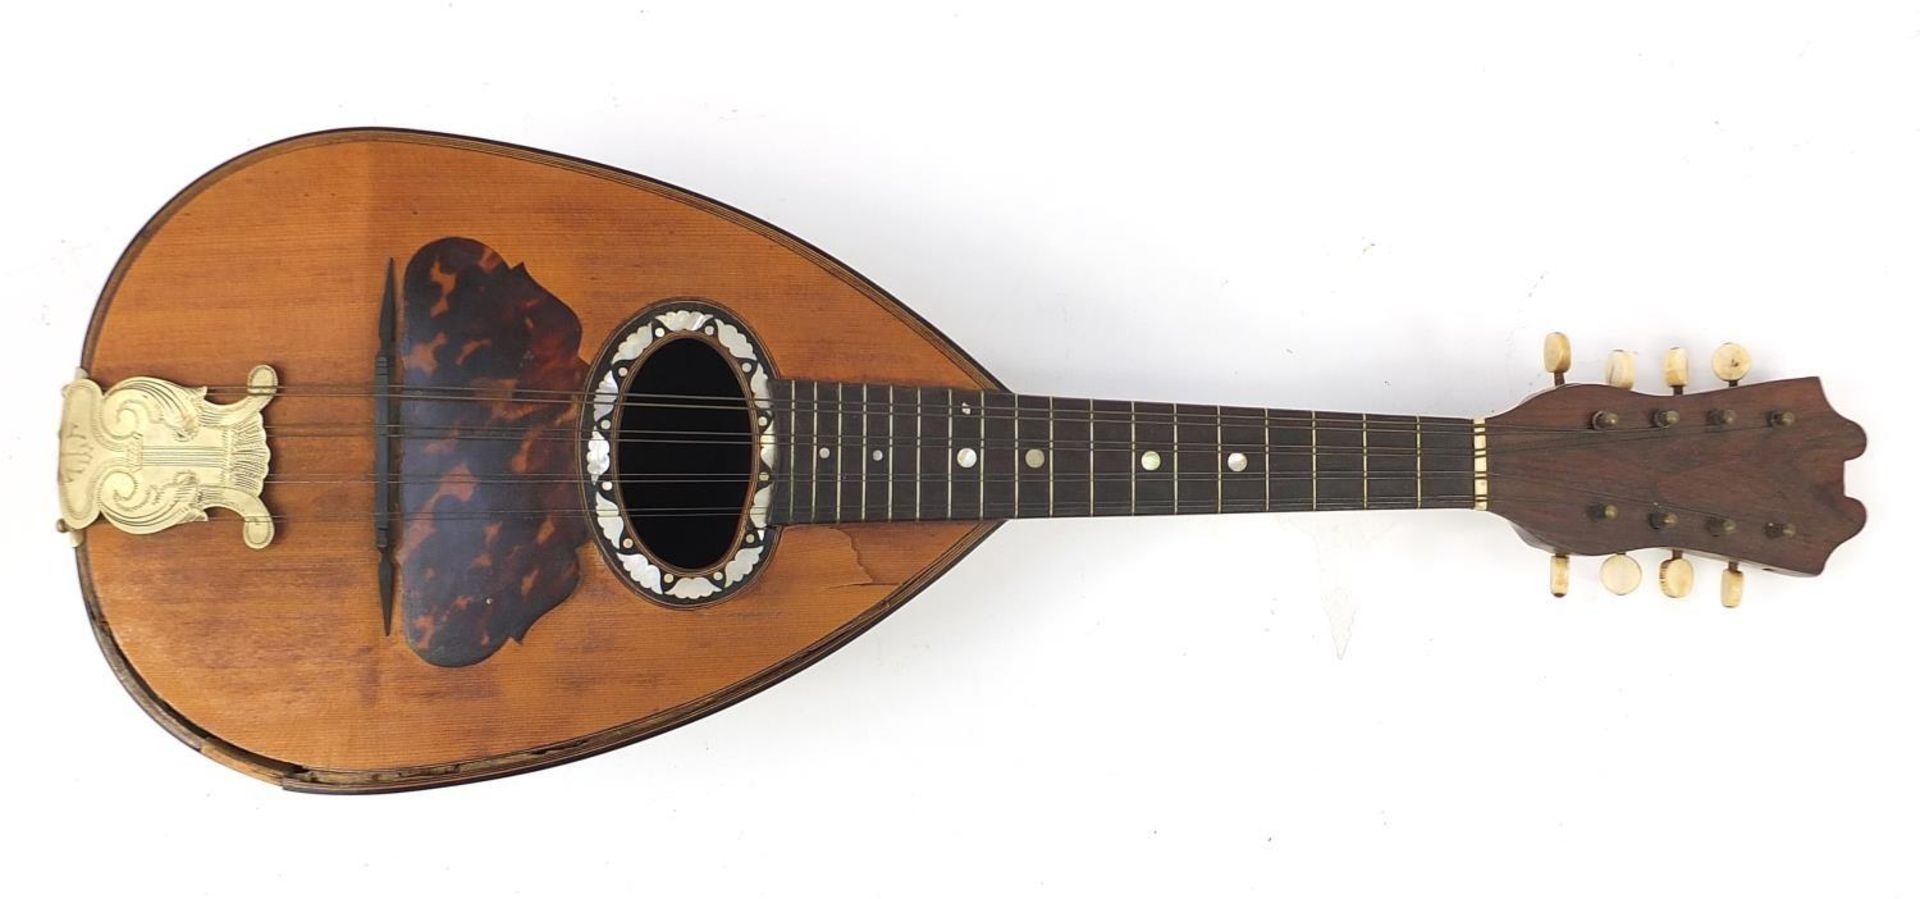 Italian inlaid rosewood melon shaped mandolin with case and G Grandini paper label to the